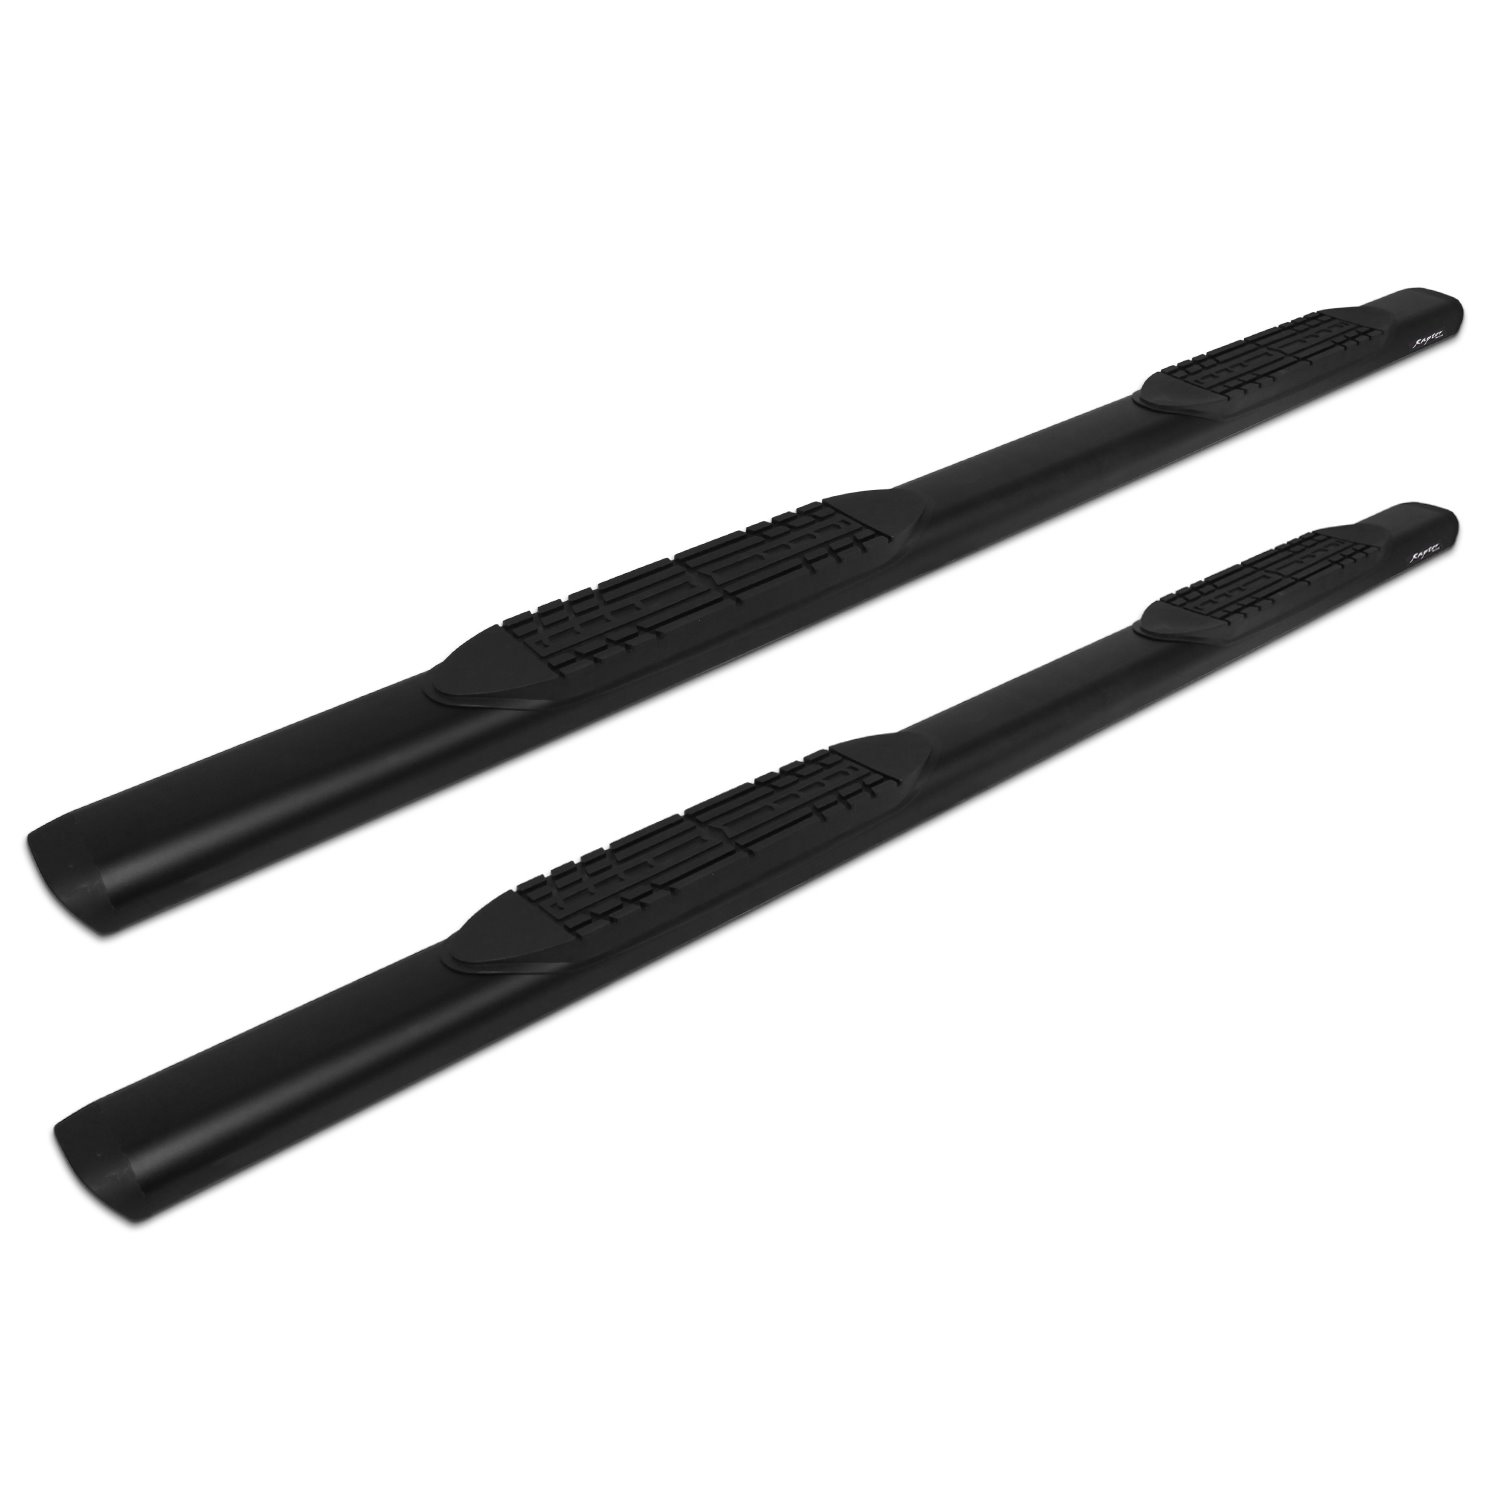 2003-0343BT 5 in Oval Style Slide Track Running Boards, Black Aluminum, 99-16 Ford F-250/F-350 Super Duty SuperCab